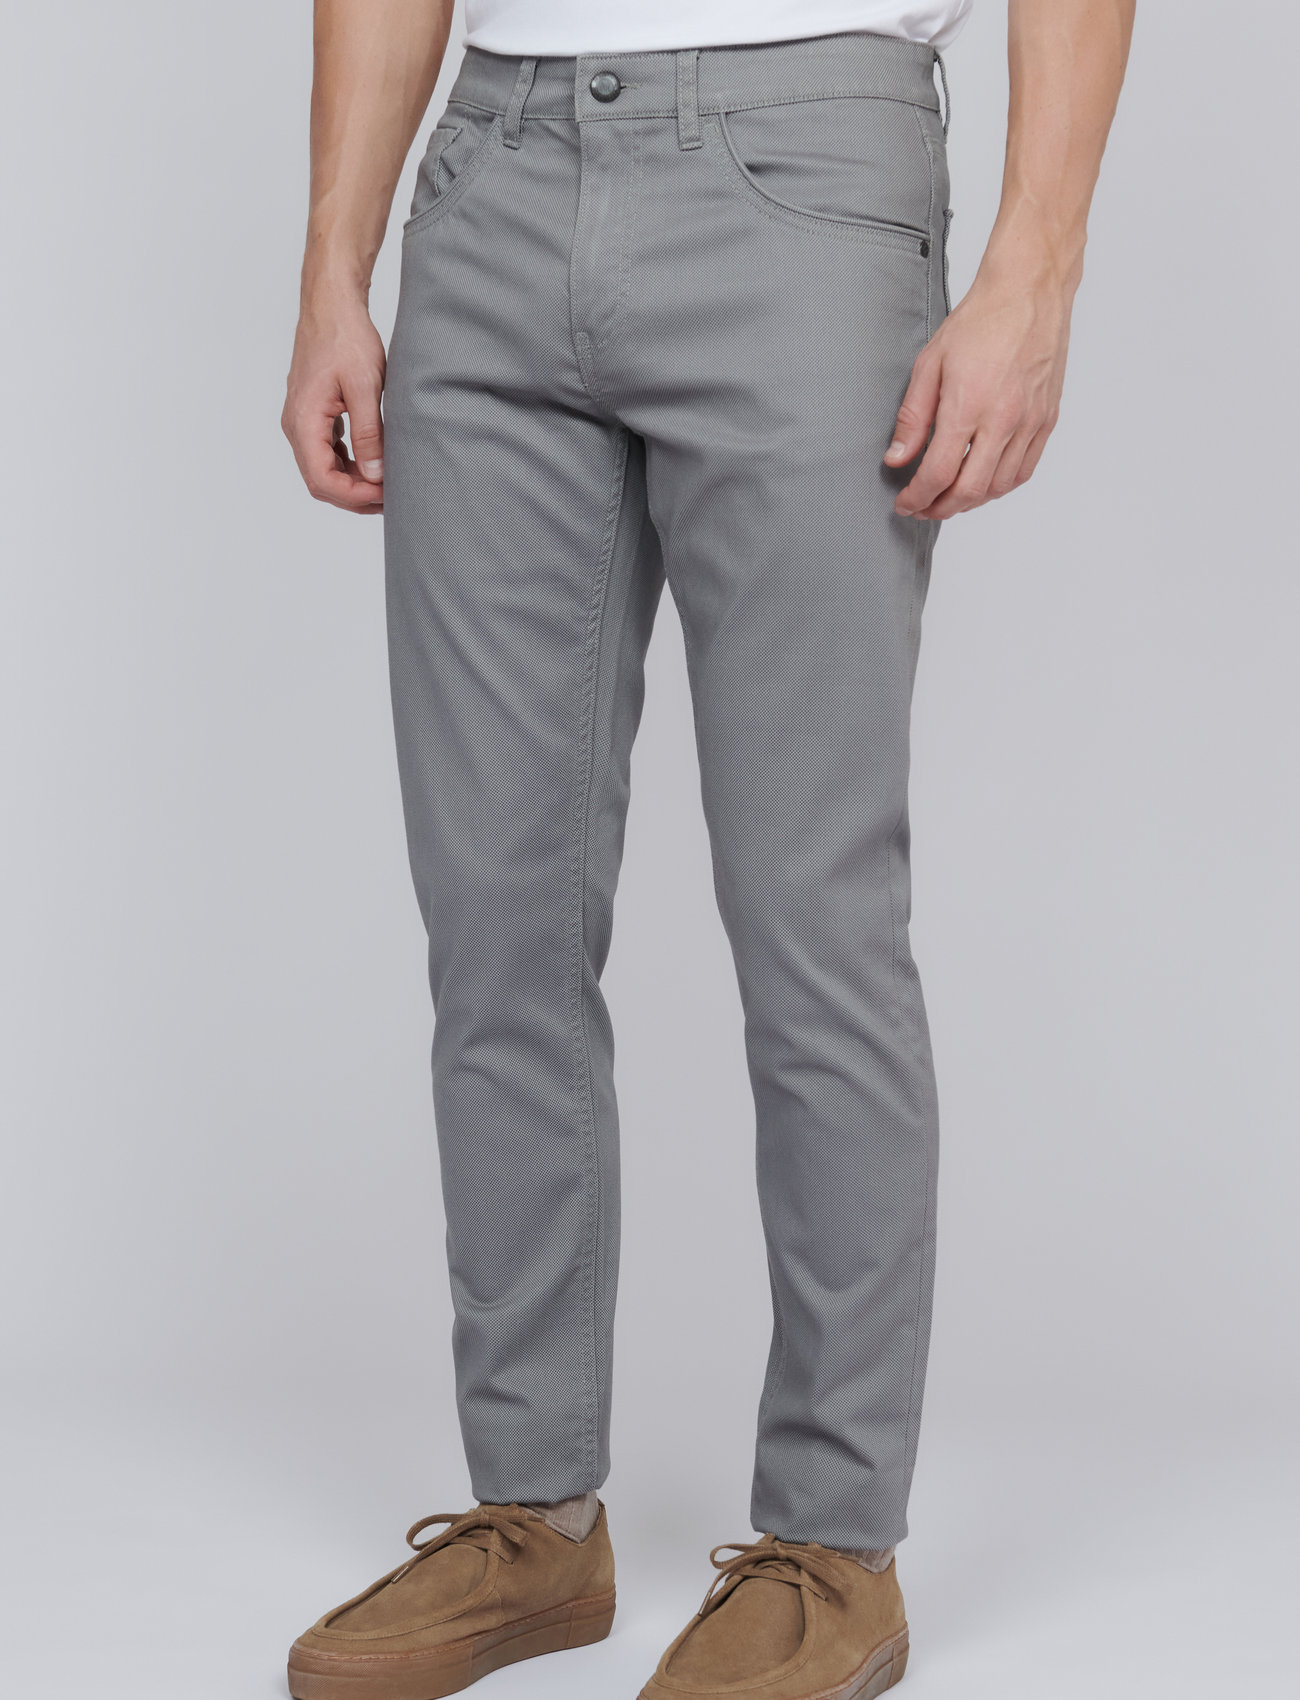 Matinique - MApete - tapered jeans - ghost gray - 1